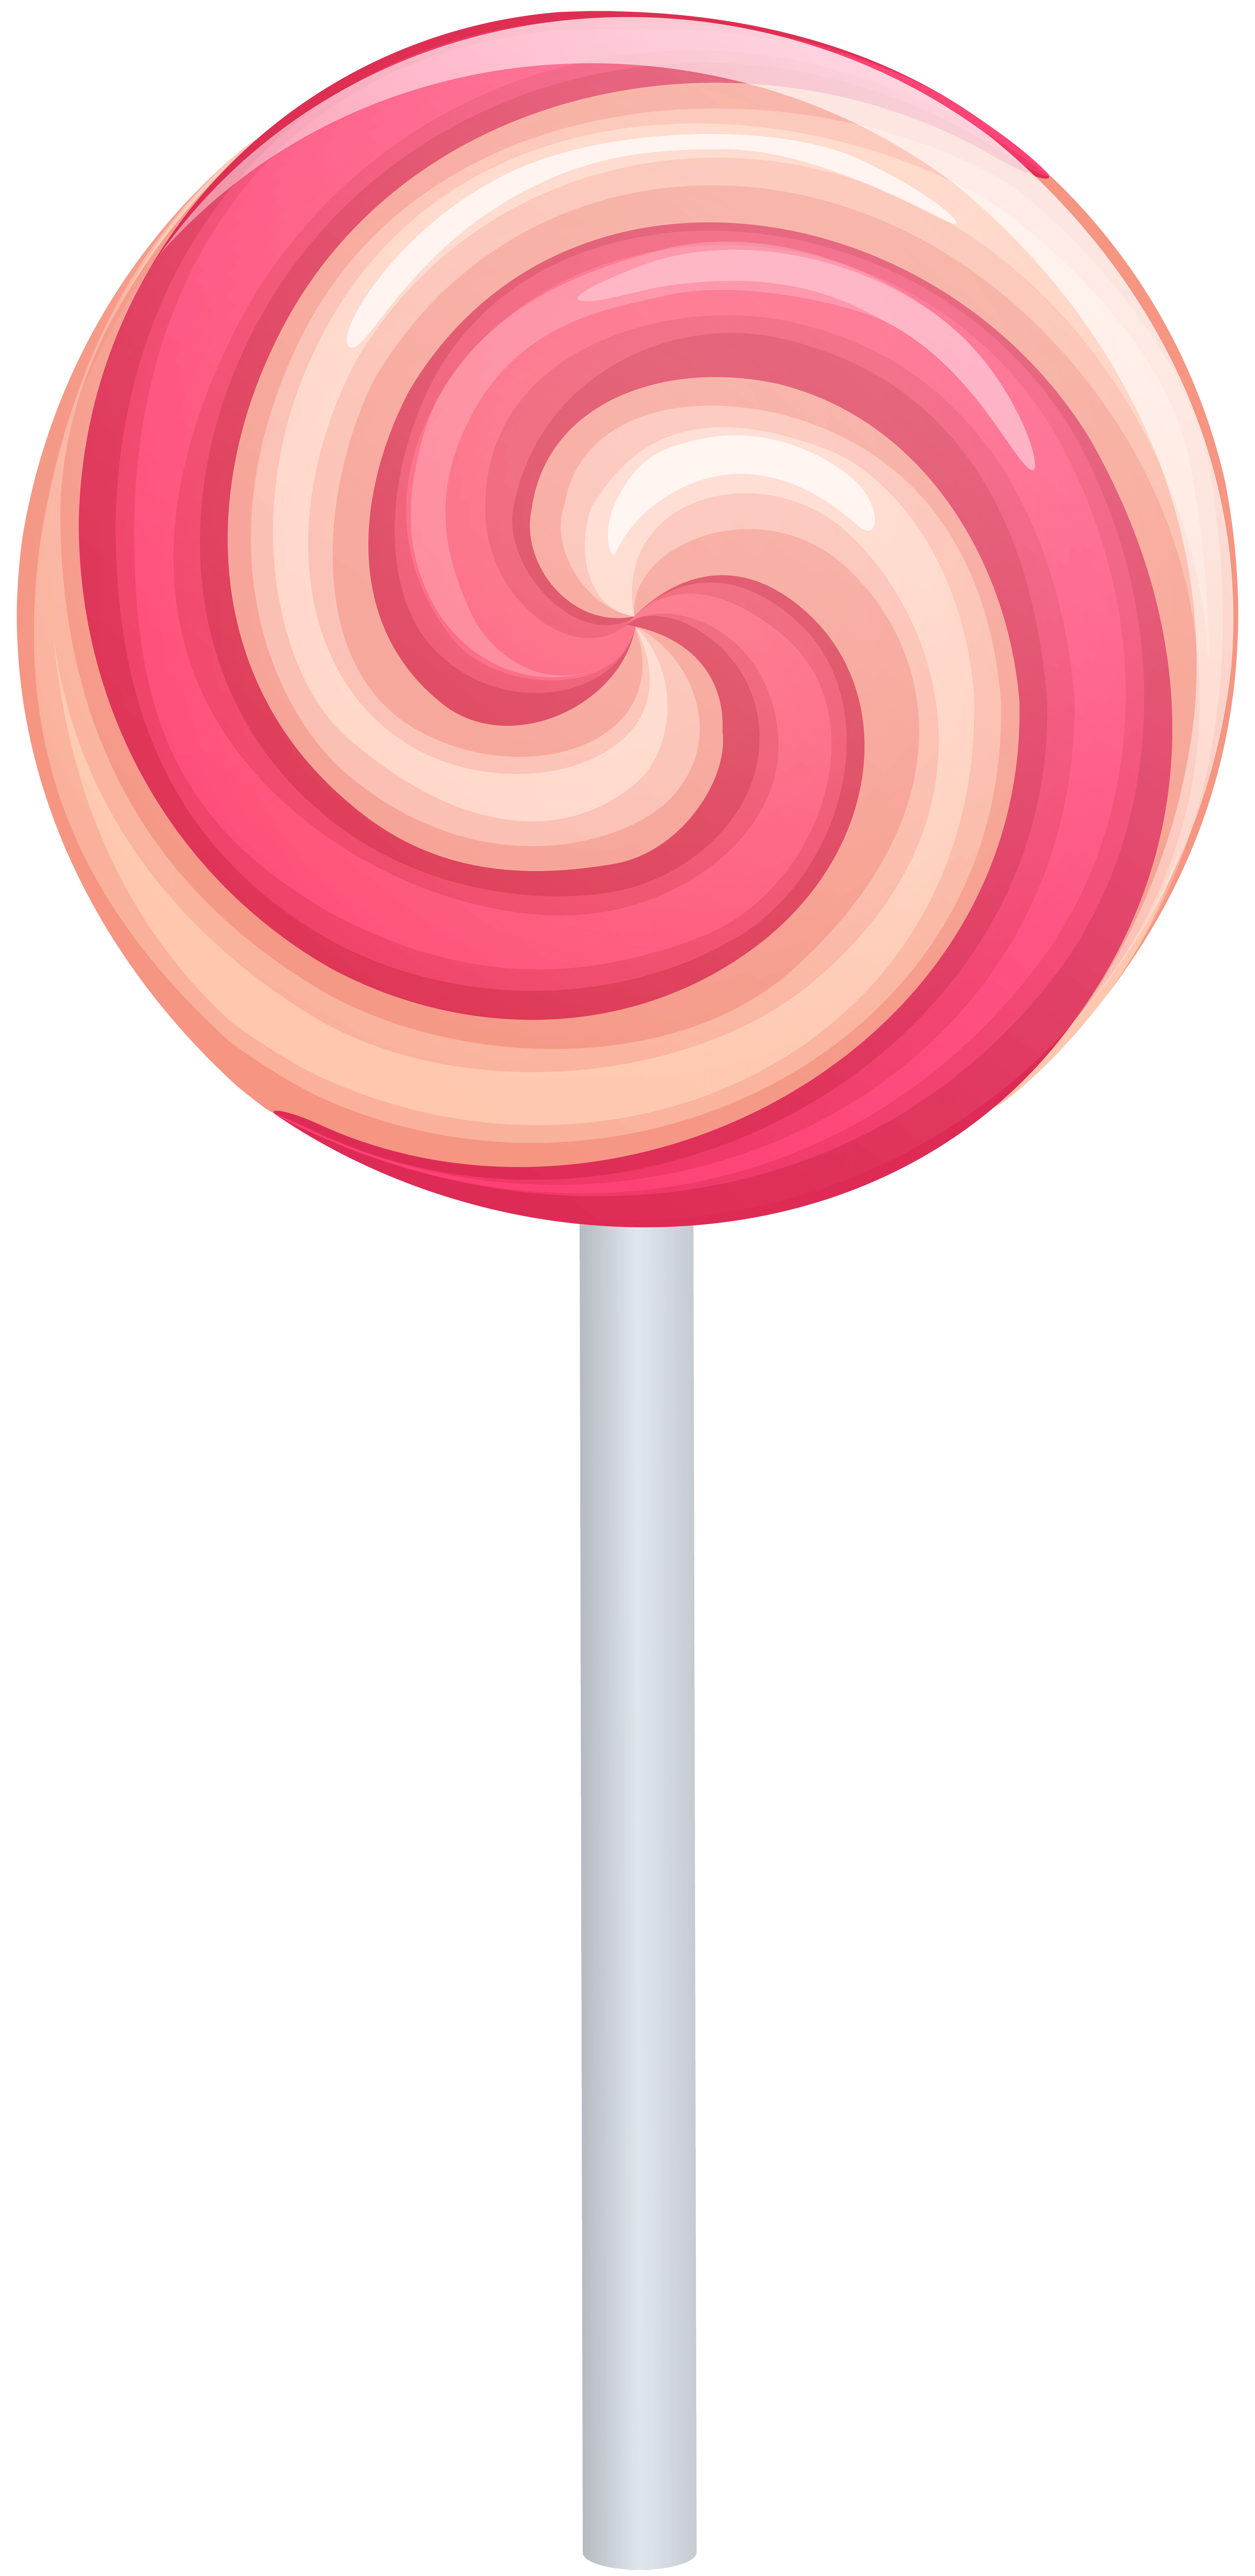 Lollipop clipart one, Lollipop one Transparent FREE for download on ...